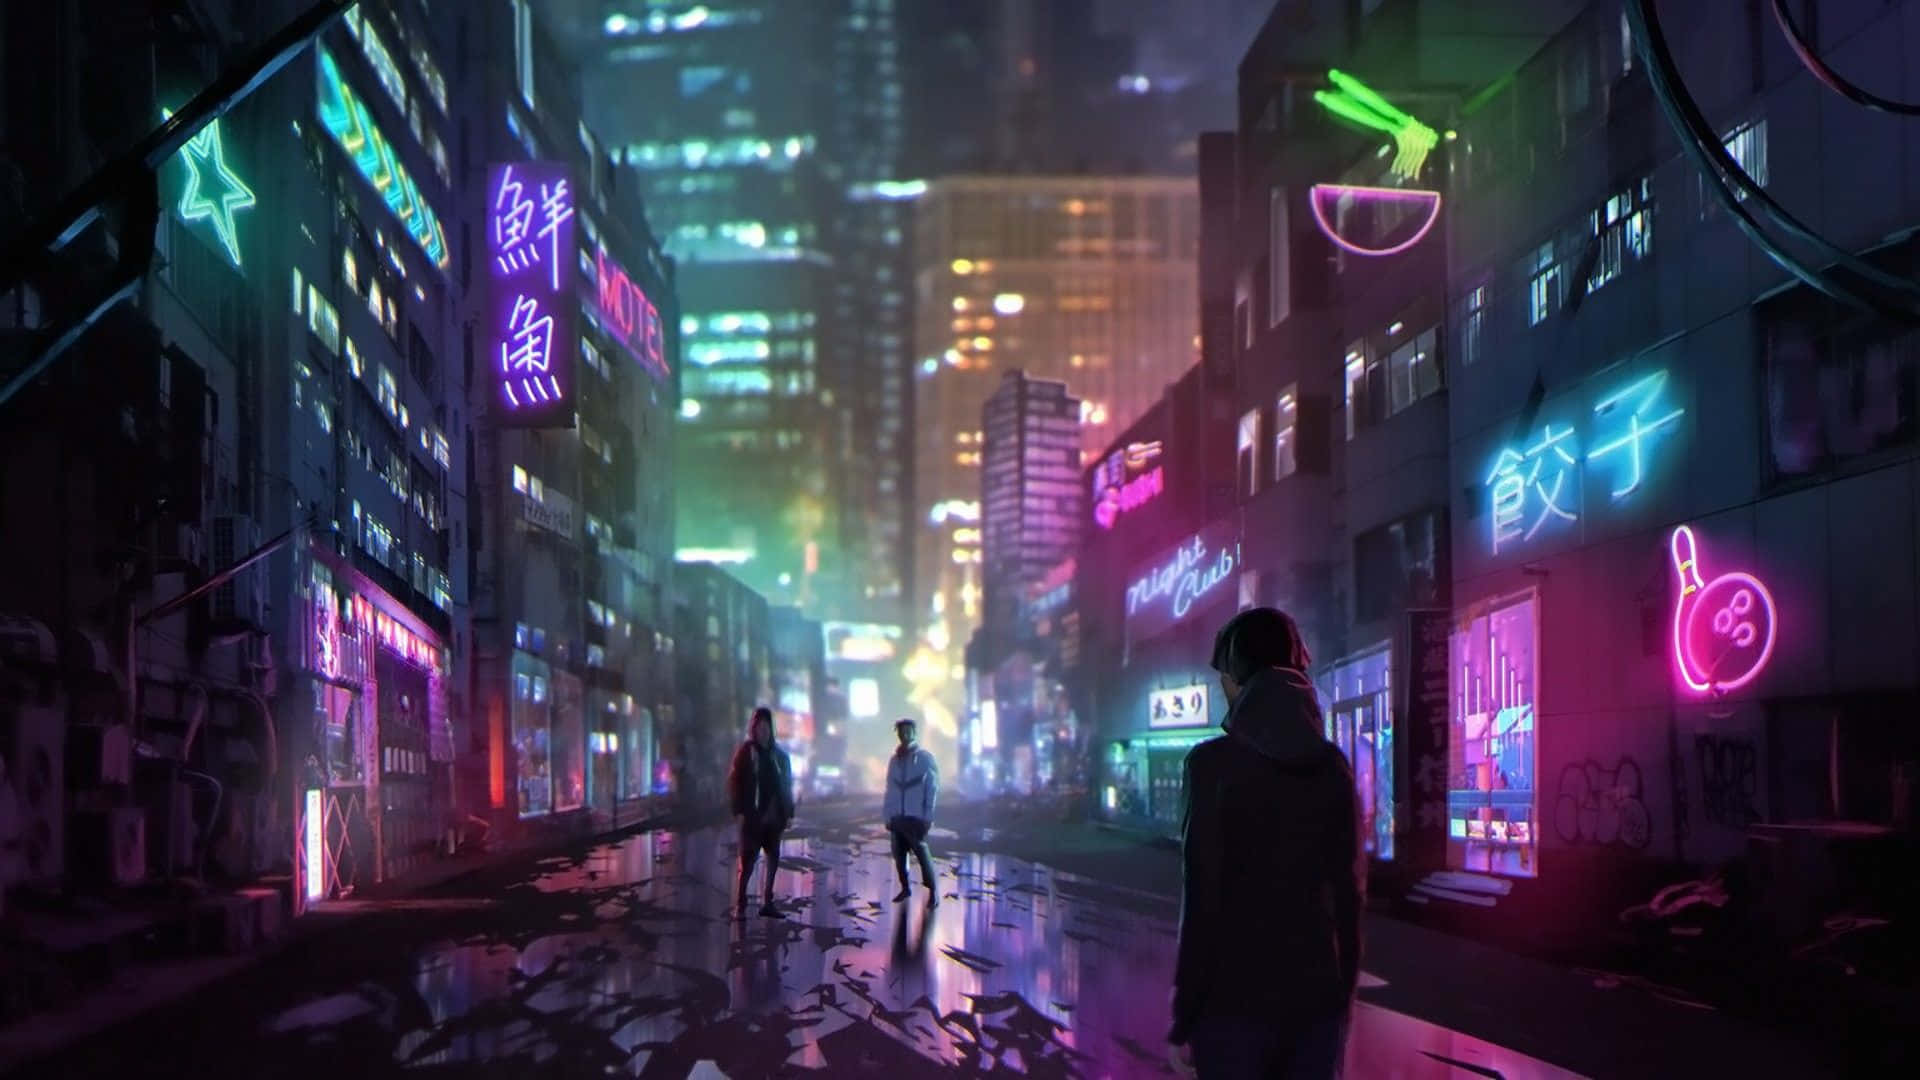 Step into the Future with Cyberpunk Aesthetic Wallpaper